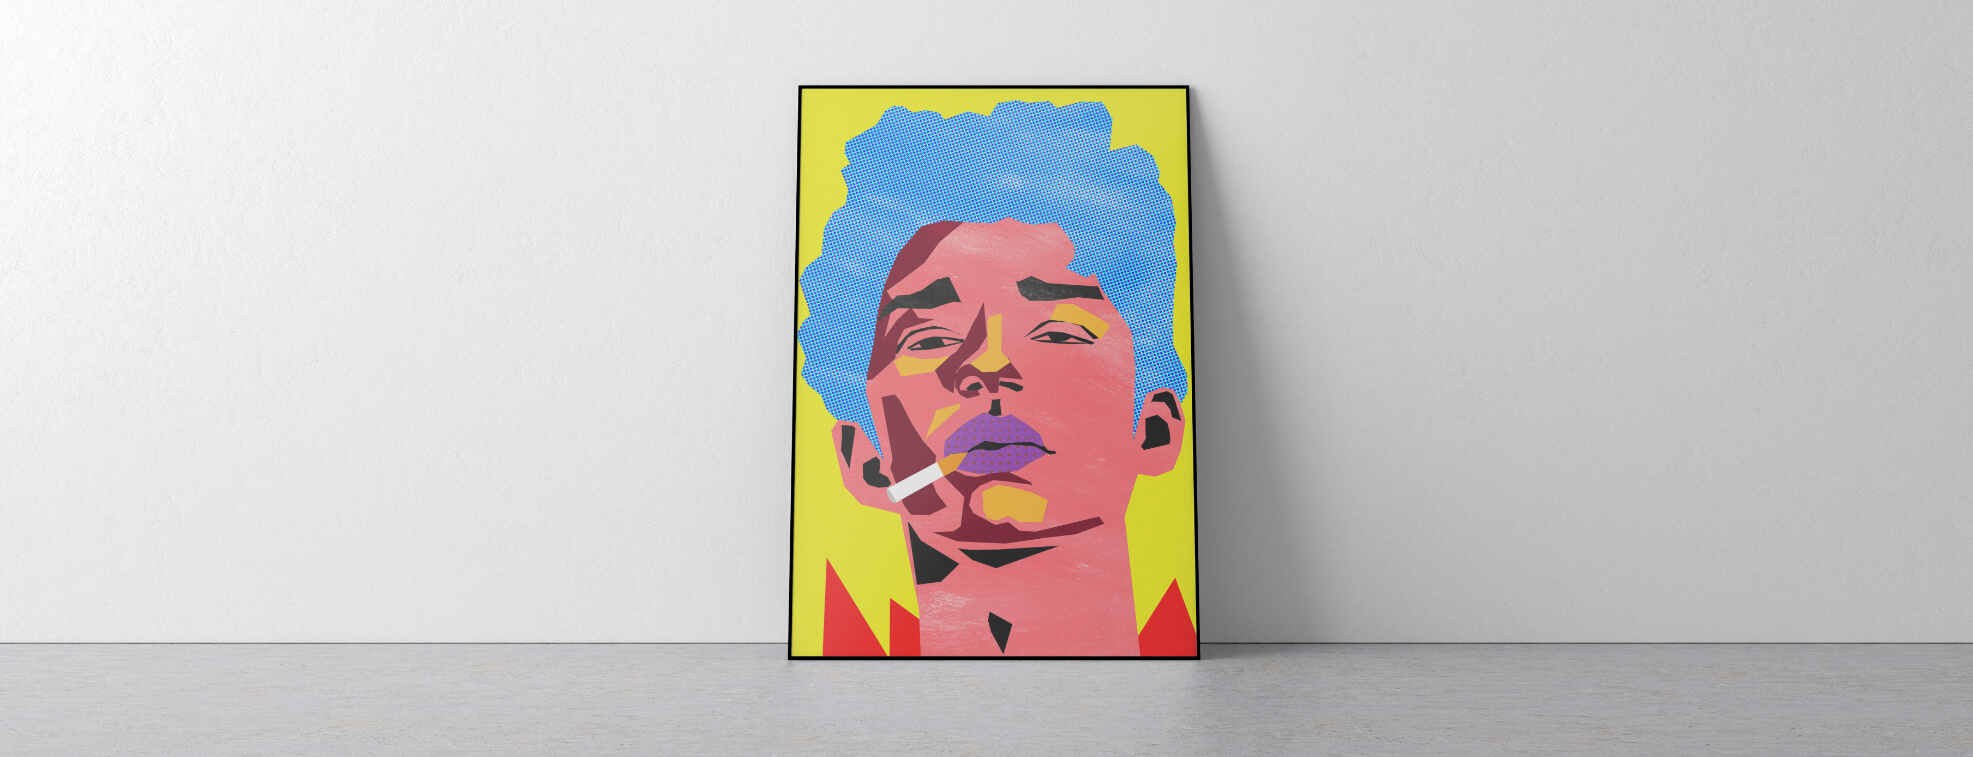 Pop art poster of a boy smoking leaned again white wall 